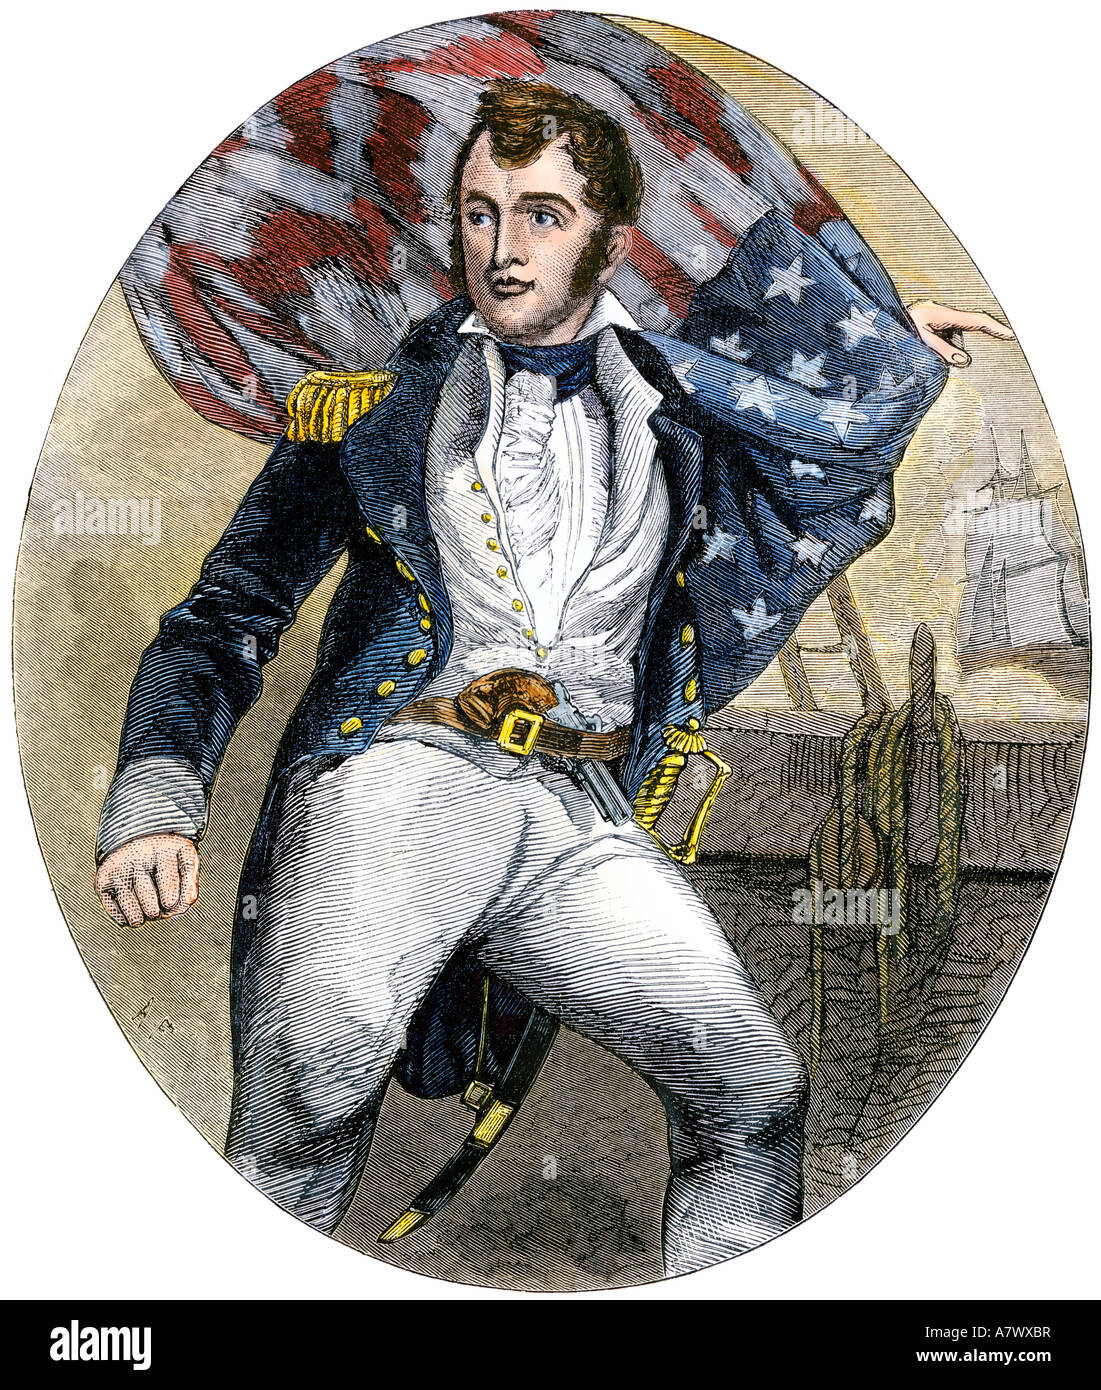 Oliver H. Perry in the rigging, War of 1812. Hand-colored woodcut Stock Photo